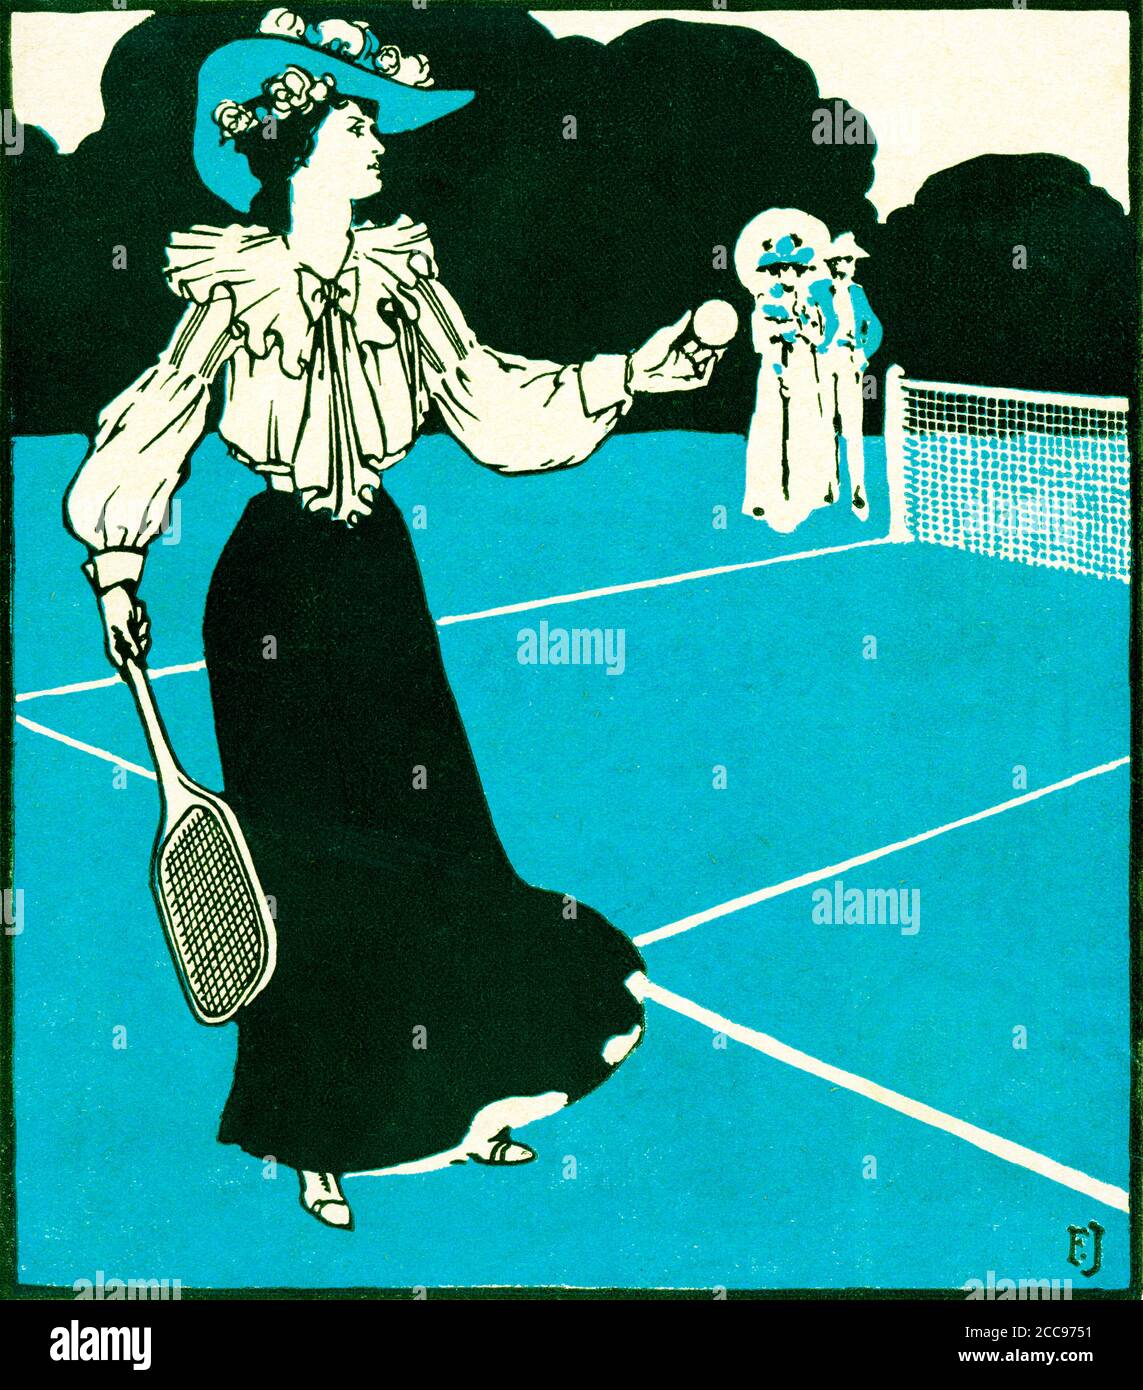 Ready To Serve, Edwardian illustration of a fashionable lady on the tennis court, ball in hand Stock Photo